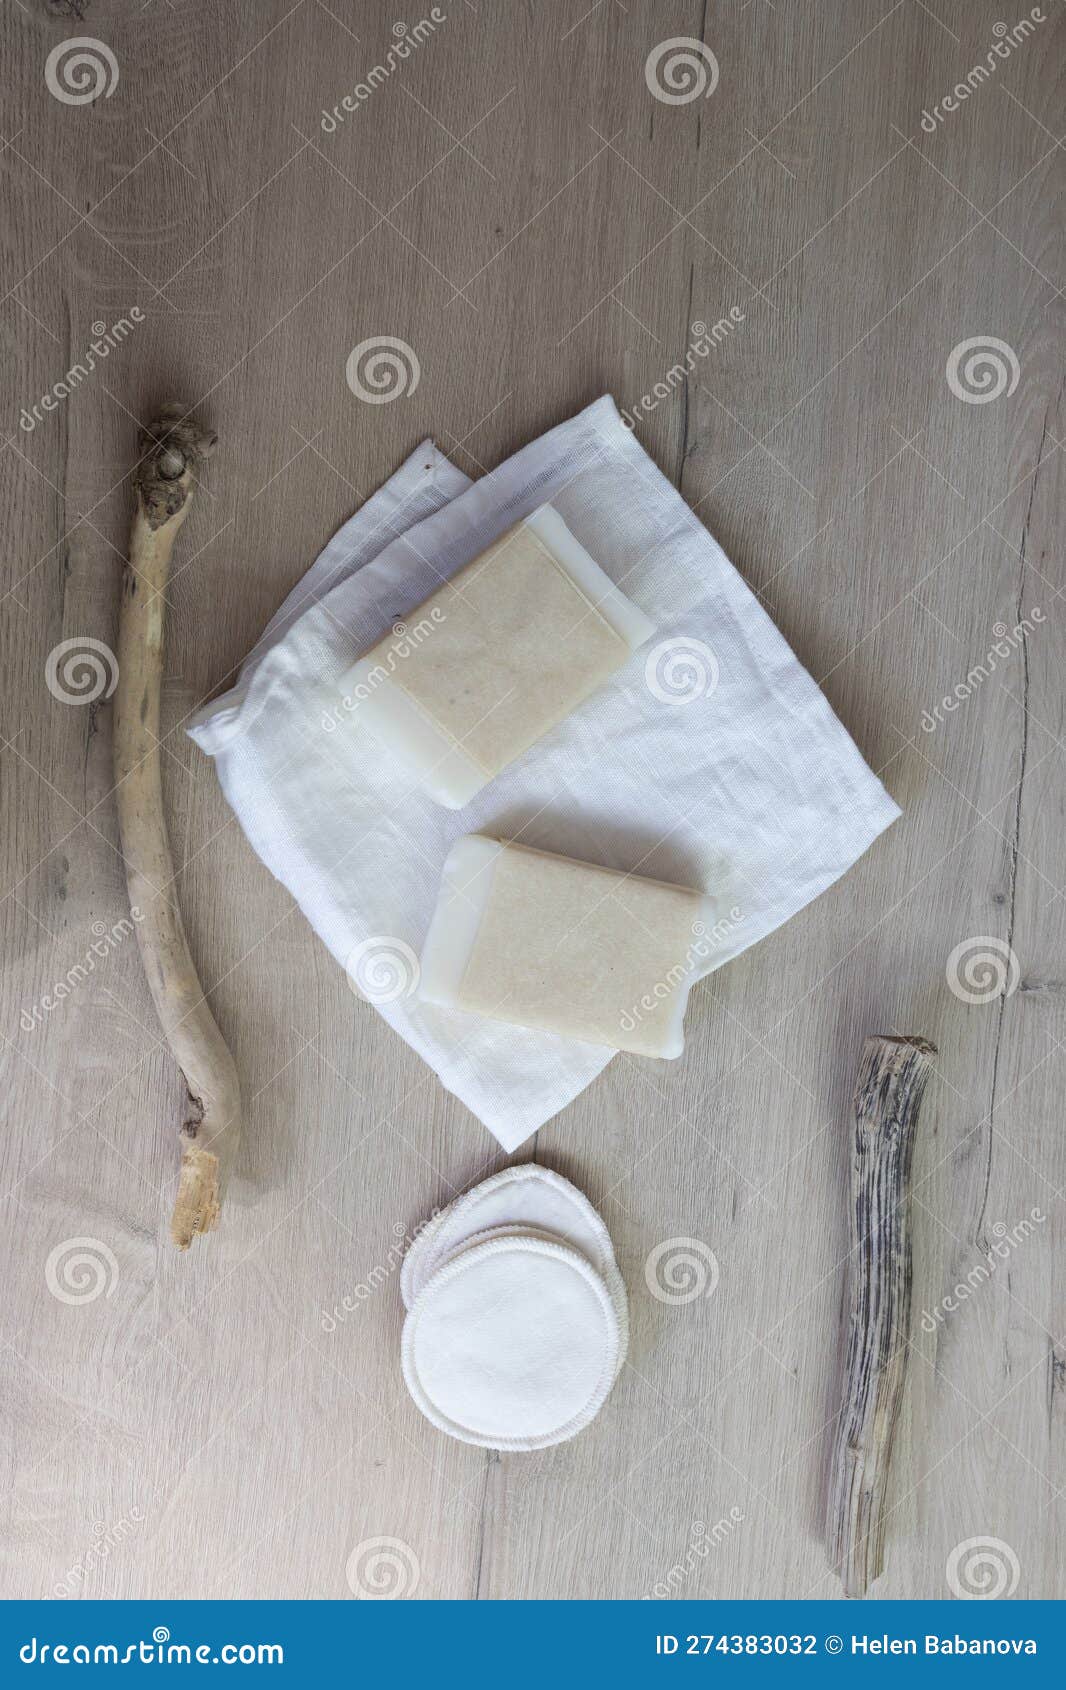 https://thumbs.dreamstime.com/z/zero-waste-homemade-craft-soap-flat-lay-top-view-soap-kraft-paper-reusable-sponges-white-towel-driftwood-stick-wood-274383032.jpg